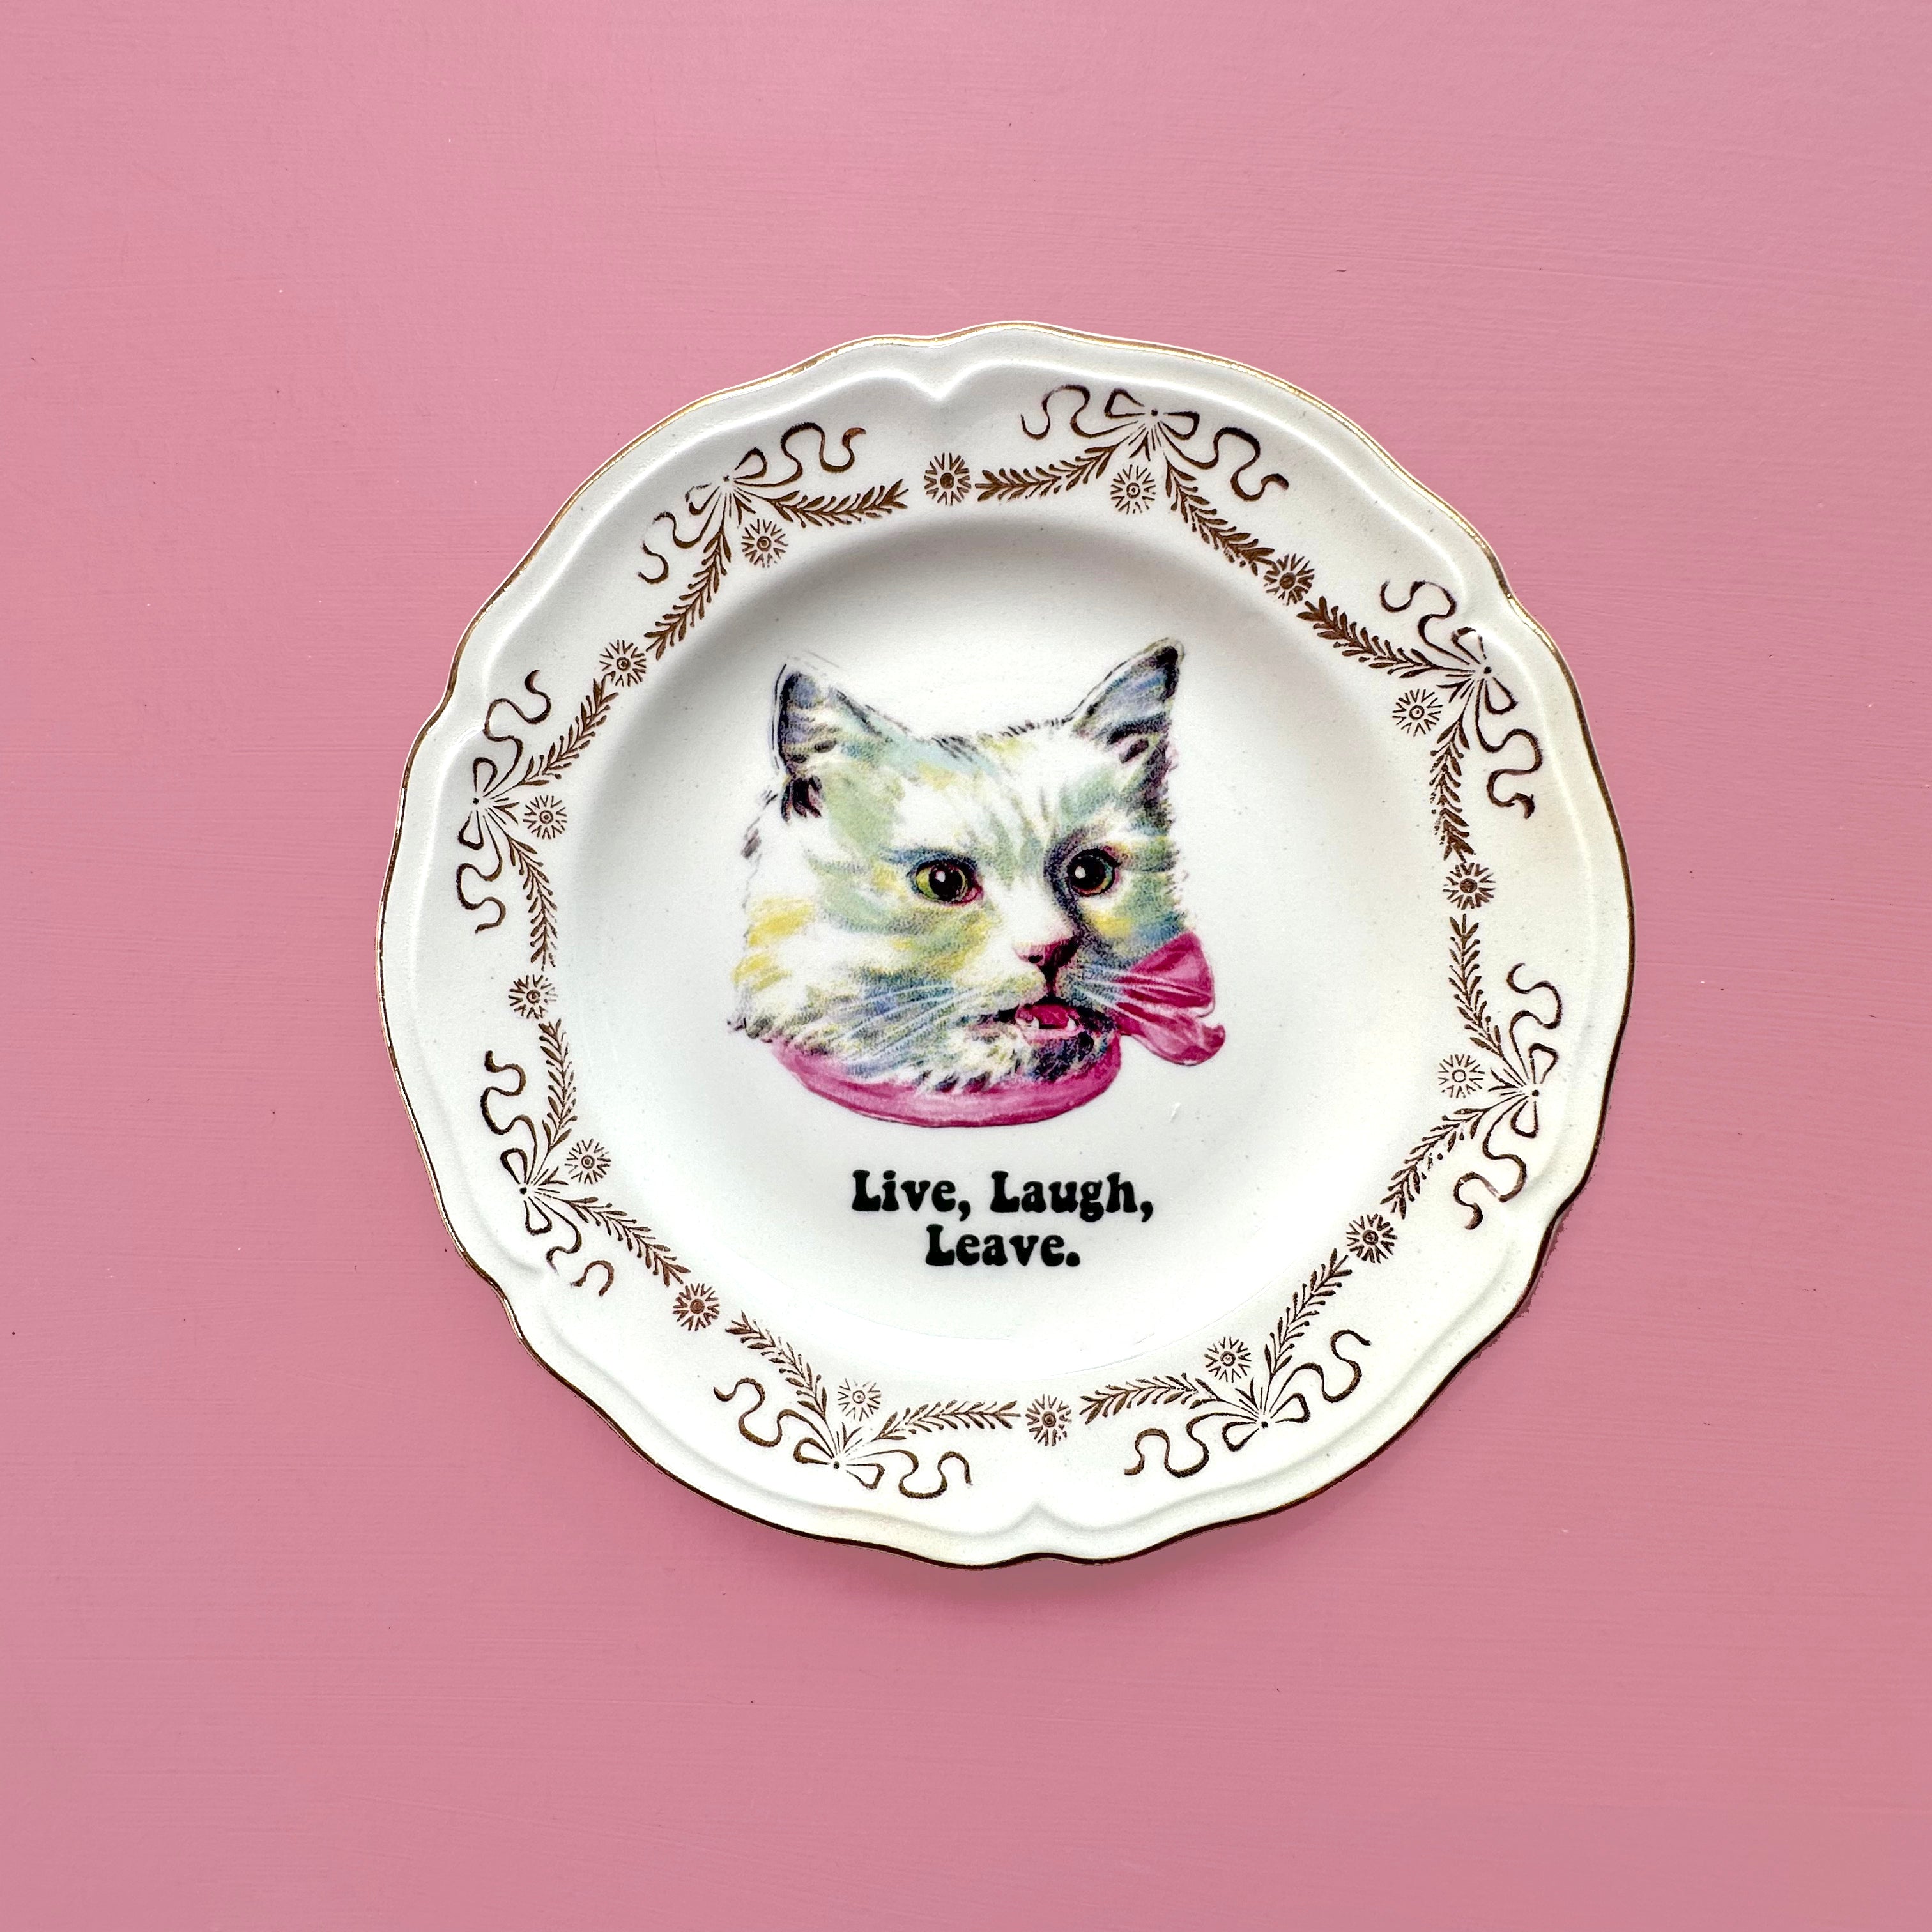 Vintage SMALL Saucer Plate - Cat Art Plate - "Live Laugh Leave."